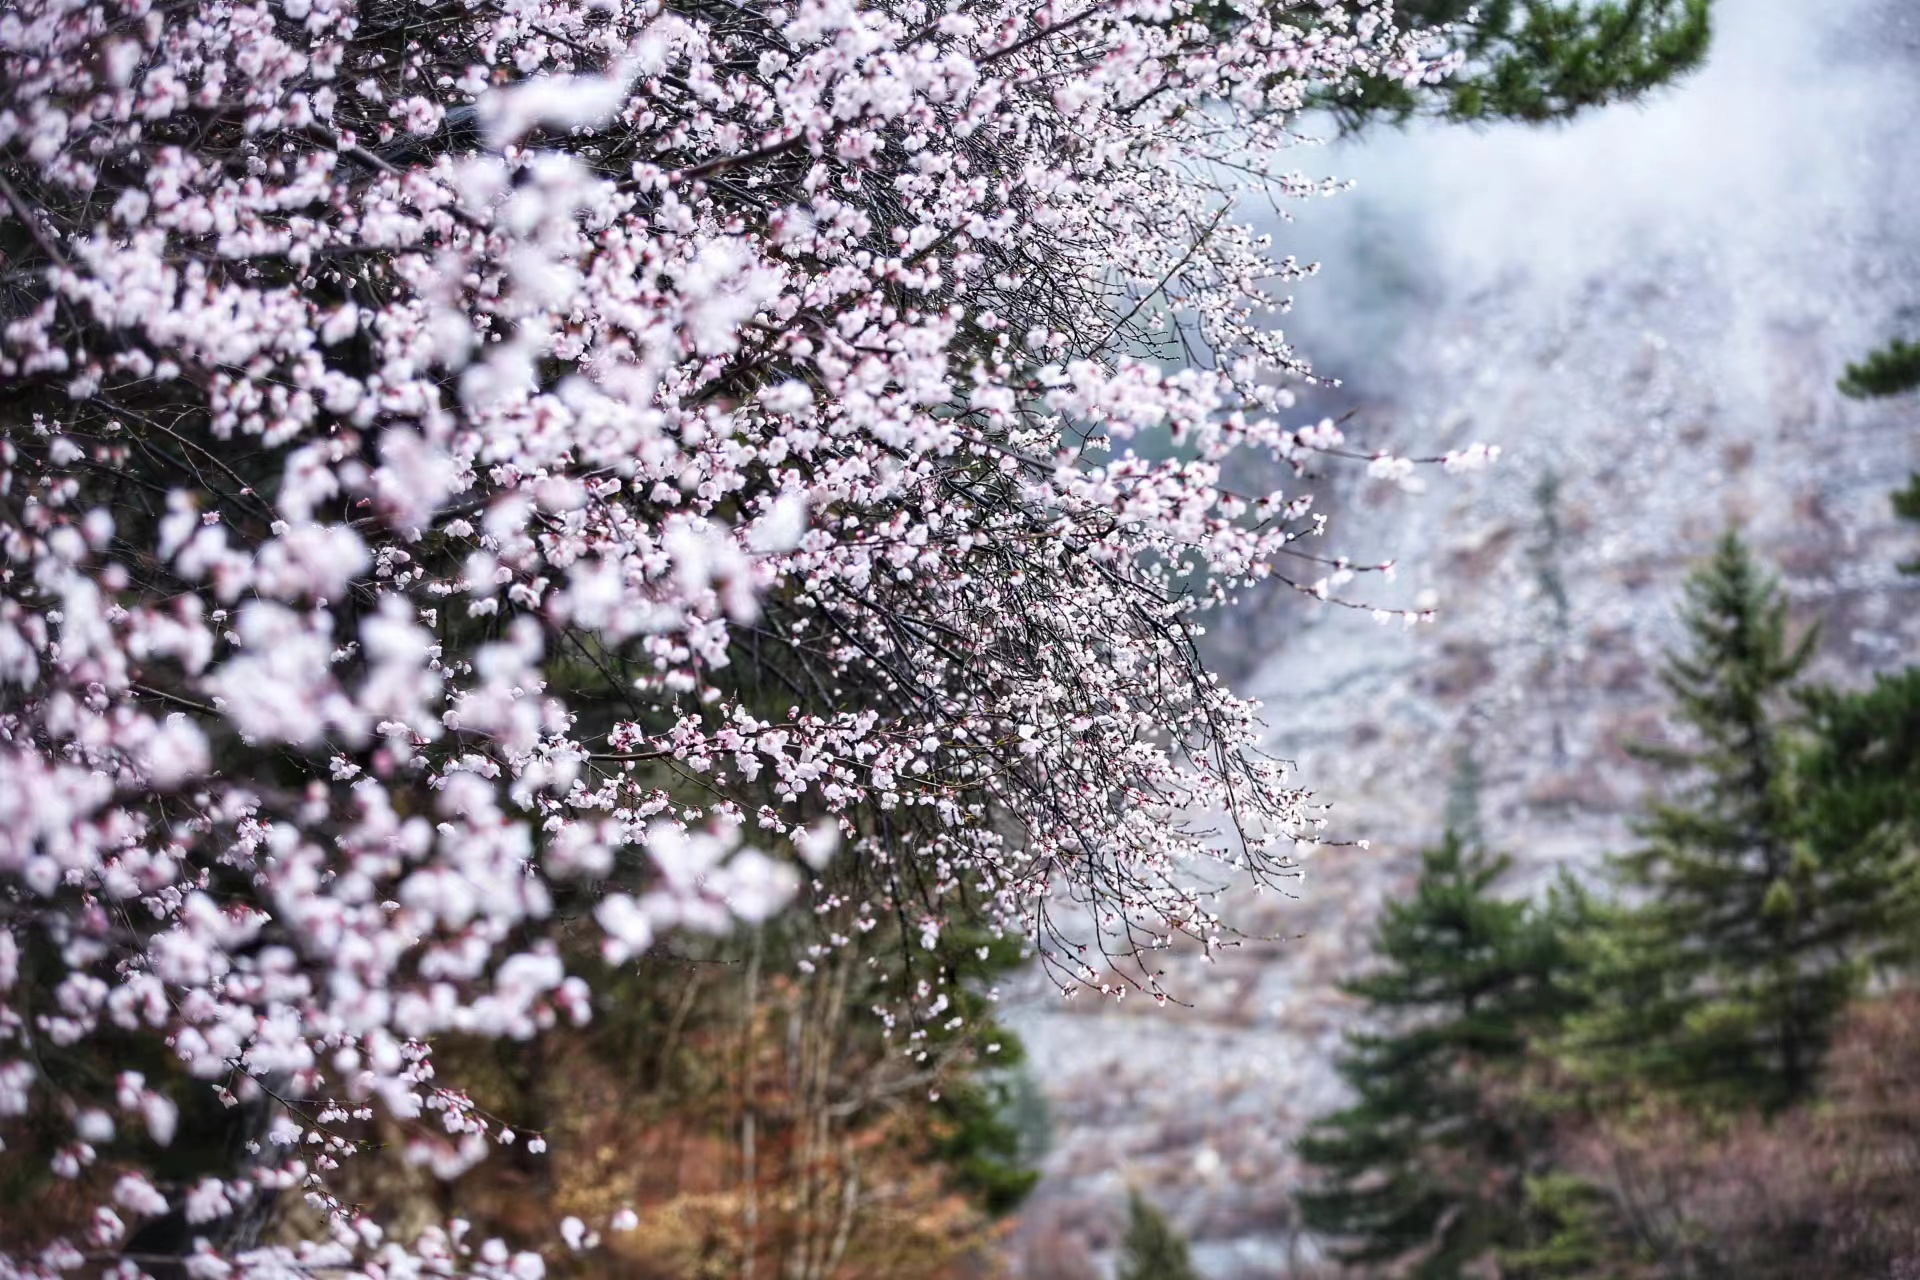 Peach flowers are spotted blossoming in Jiuzhaigou Valley, Sichuan Province. /Photo provided by Liu Langtao